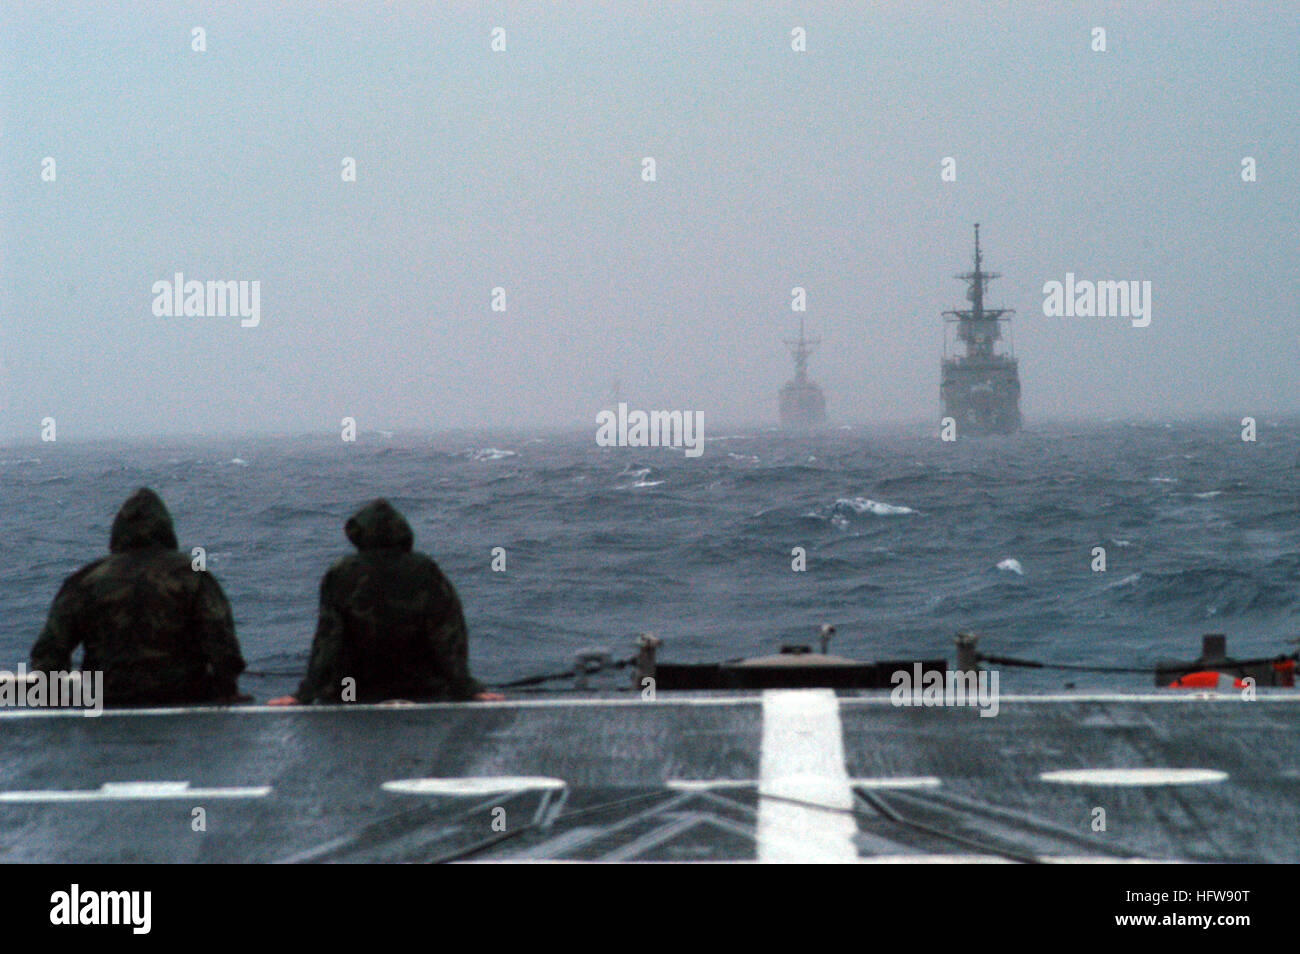 080613-N-3581D-006 GULF OF THAILAND (June 13, 2008) Two Sailors watch the Royal Thai Navy frigate HTMS Phutta Loetla Naphalai (FF 462) and the frigate USS Ford (FFG 54) encounter rough seas, low visibility, high winds, and rain squalls from the fantail of the frigate USS Jarrett (FFG 33). Jarrrett is one of several U.S. and Thai ships taking part in Cooperation Afloat Readiness and Training (CARAT) 2008. U.S. Navy photo by Mass Communication Specialist 1st Class Maurice Dayao (Released) View from USS Jarrett DVIDS101448 Stock Photo